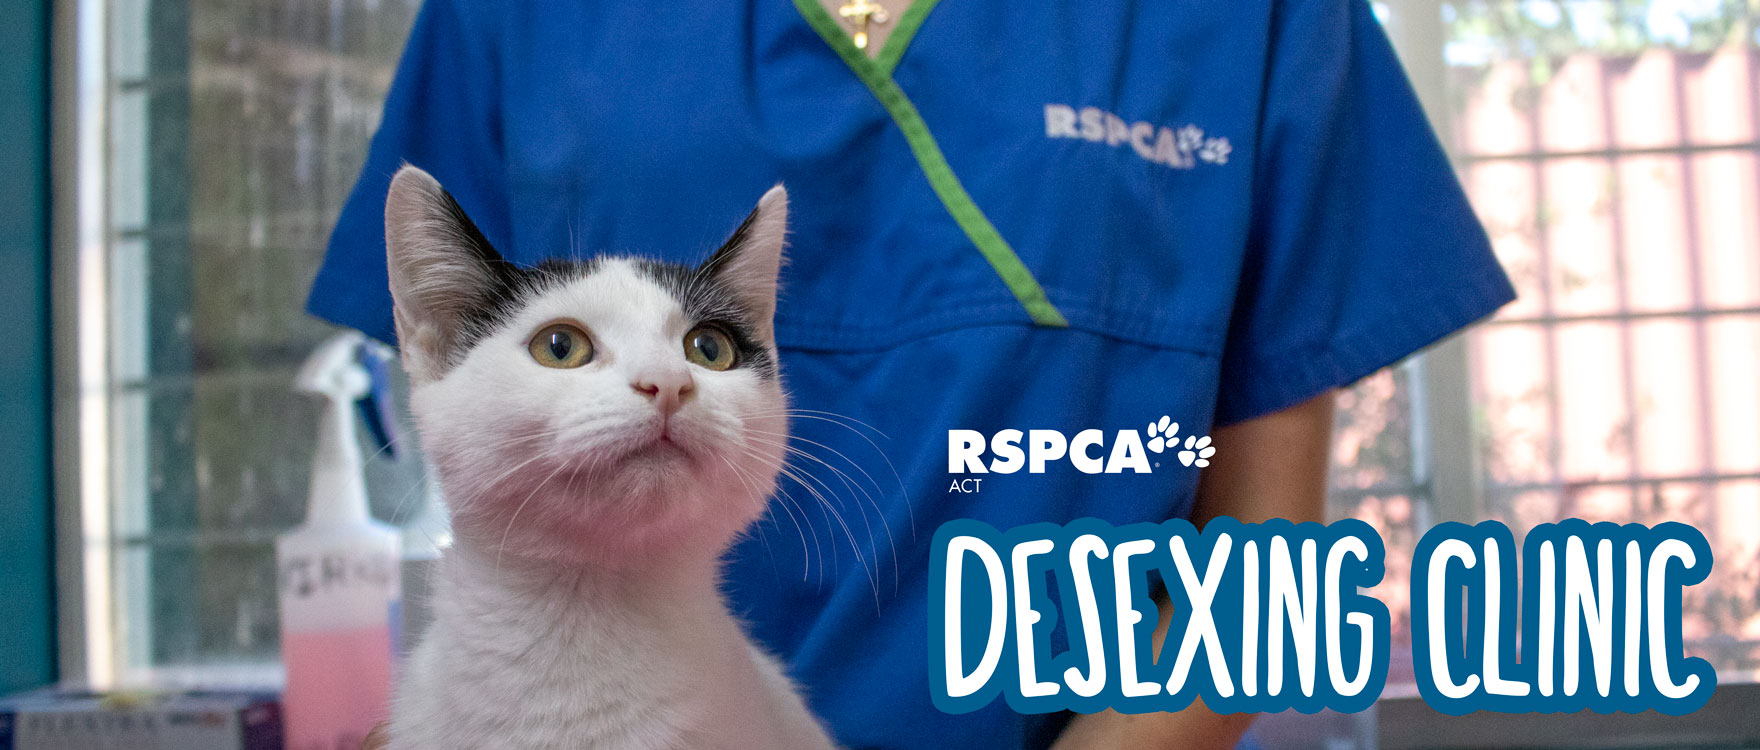 RSPCA ACT Desexing Clinic is now open